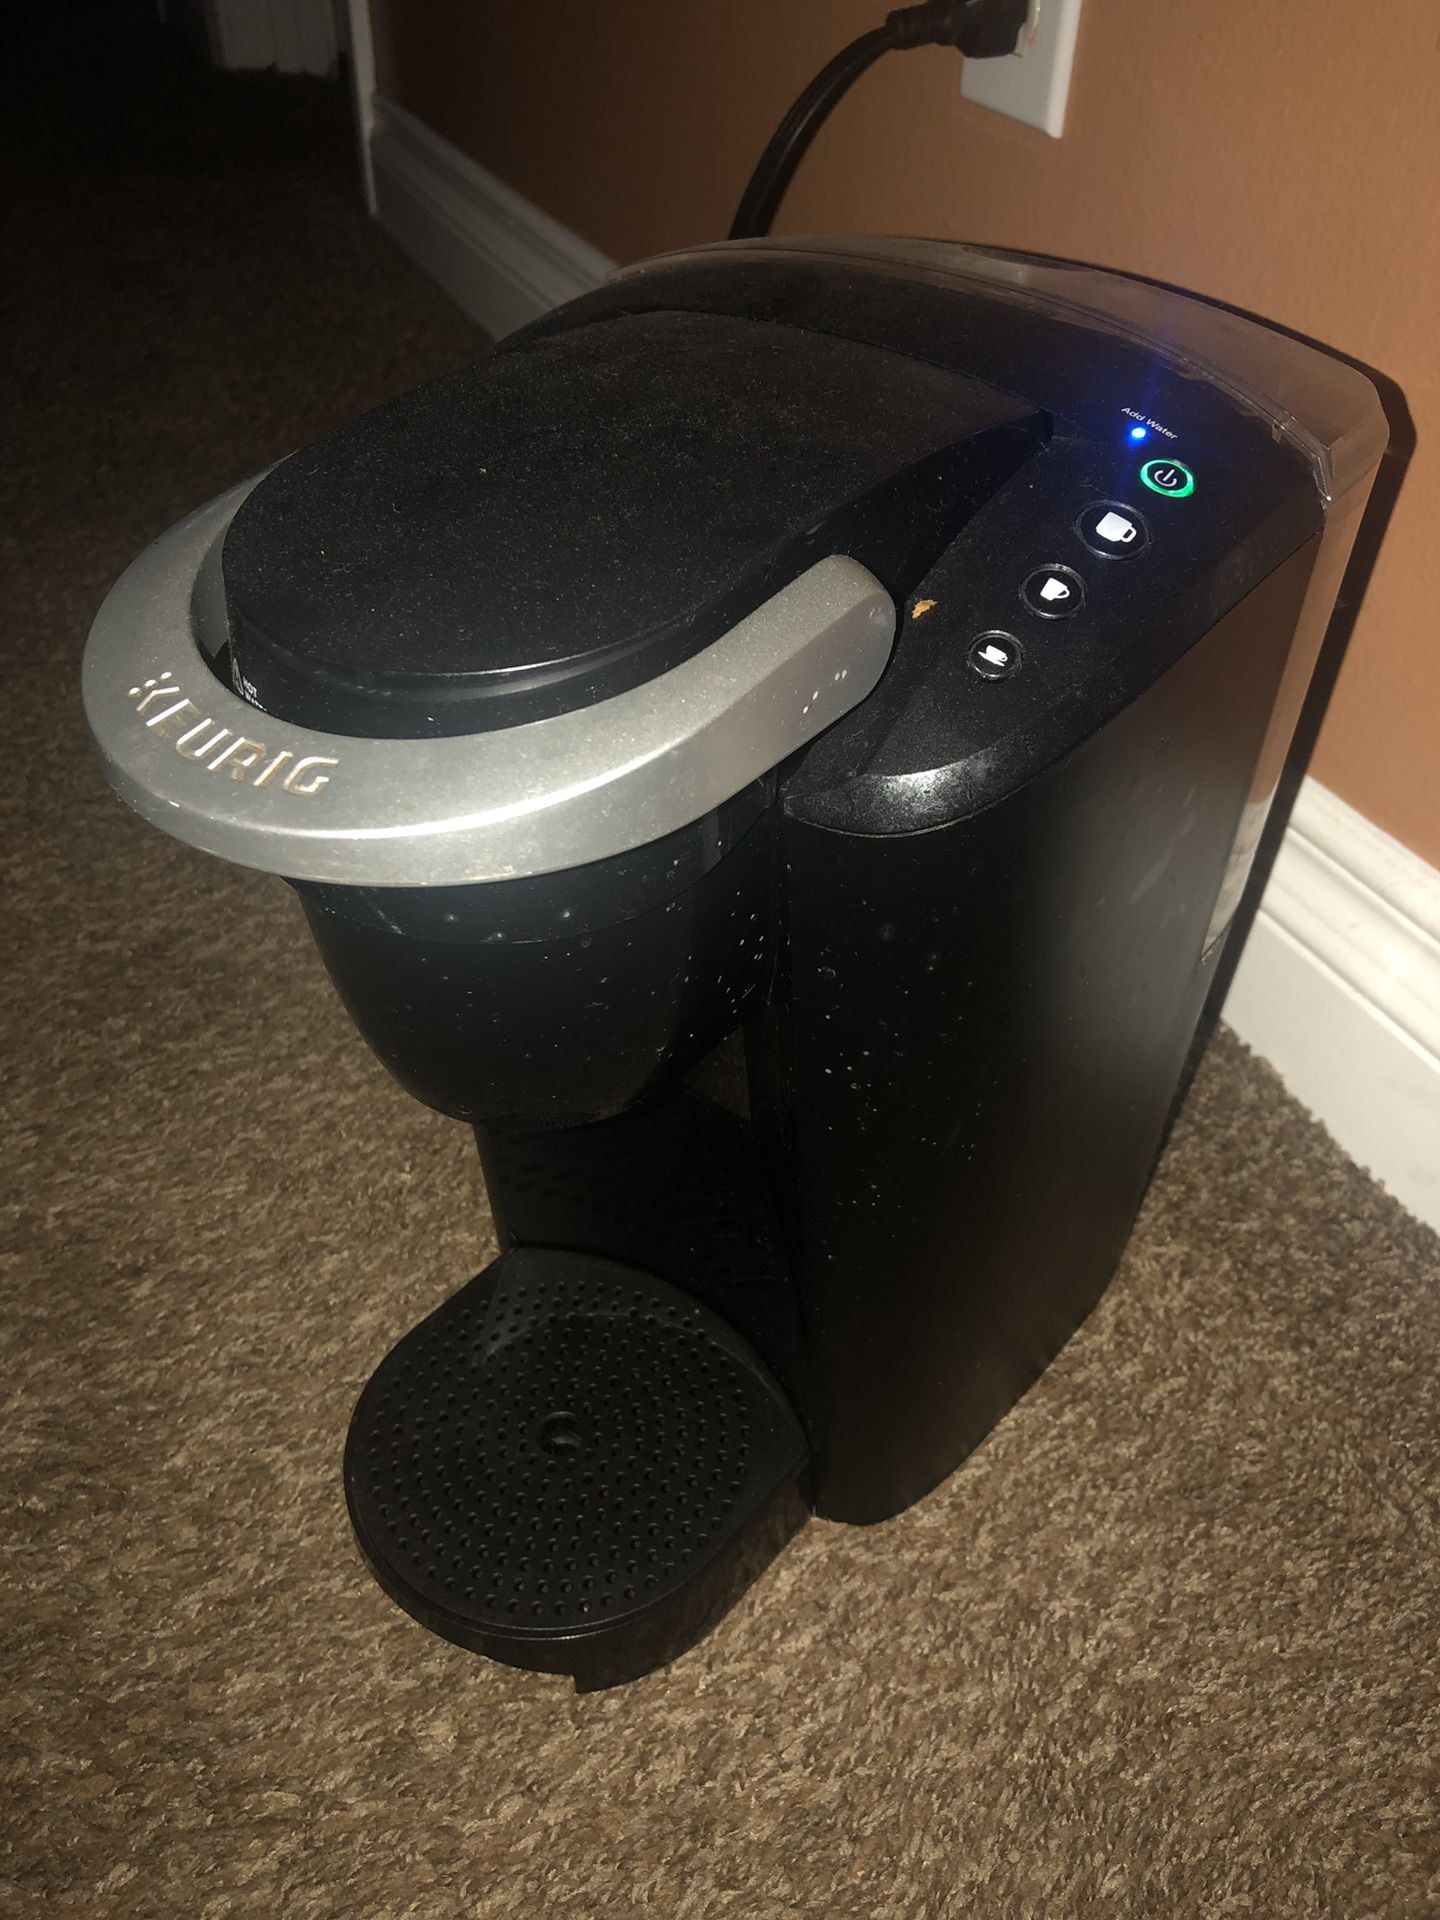 Keurig and coffee stand plays bread maker and waffle iron